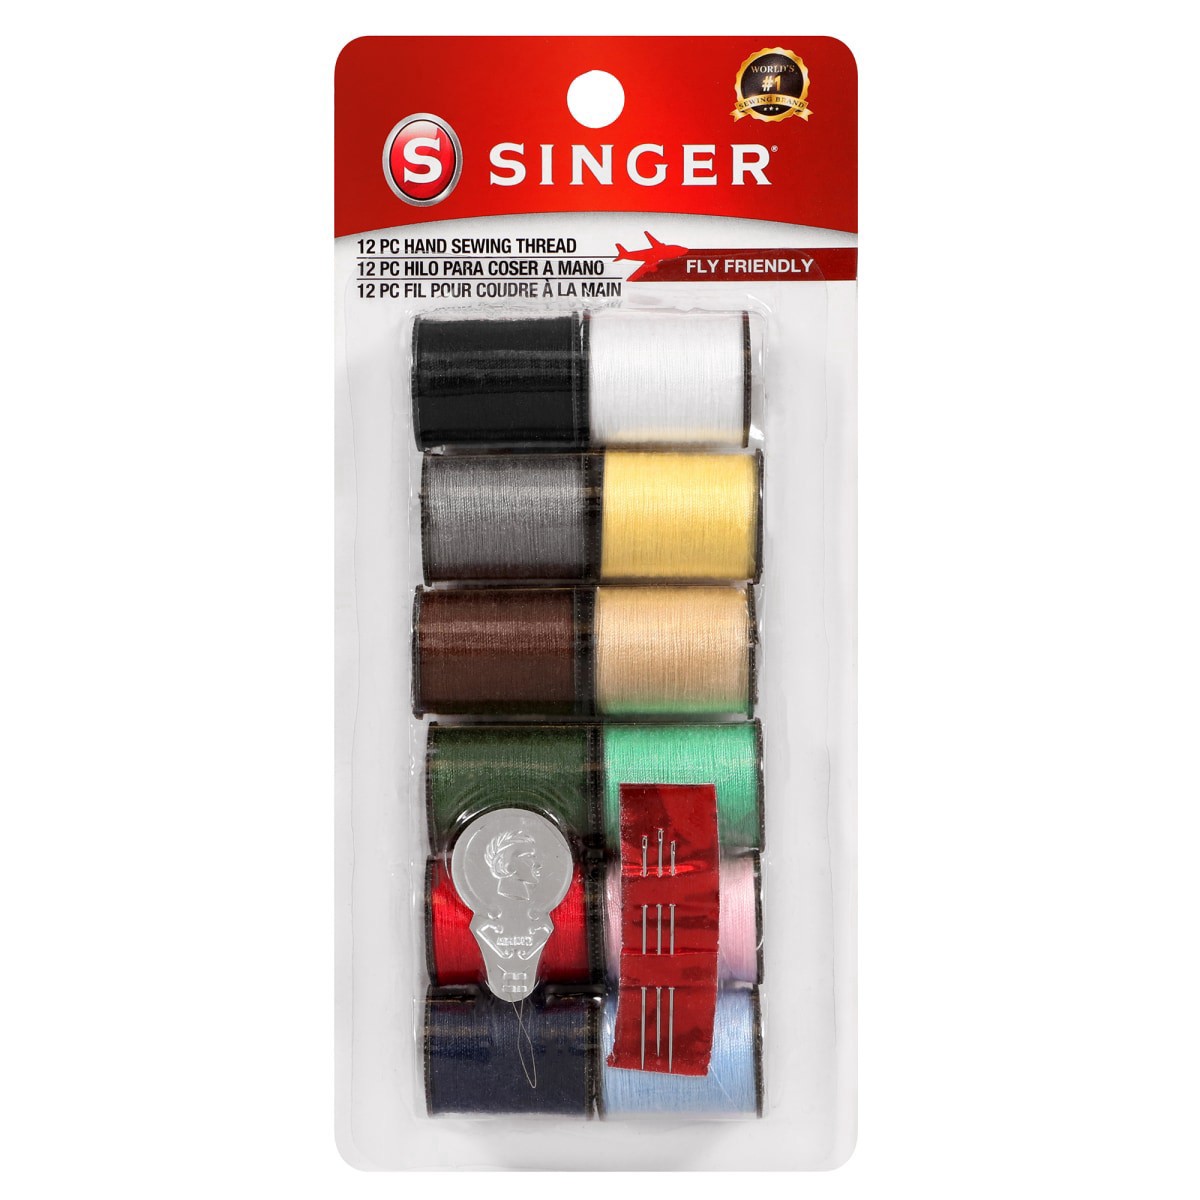 slide 1 of 2, SINGER Hand Sewing Thread Spools Kit with Assorted Color Thread, 25 yards each - Includes Hand Needles & Needle Threader, 12 ct